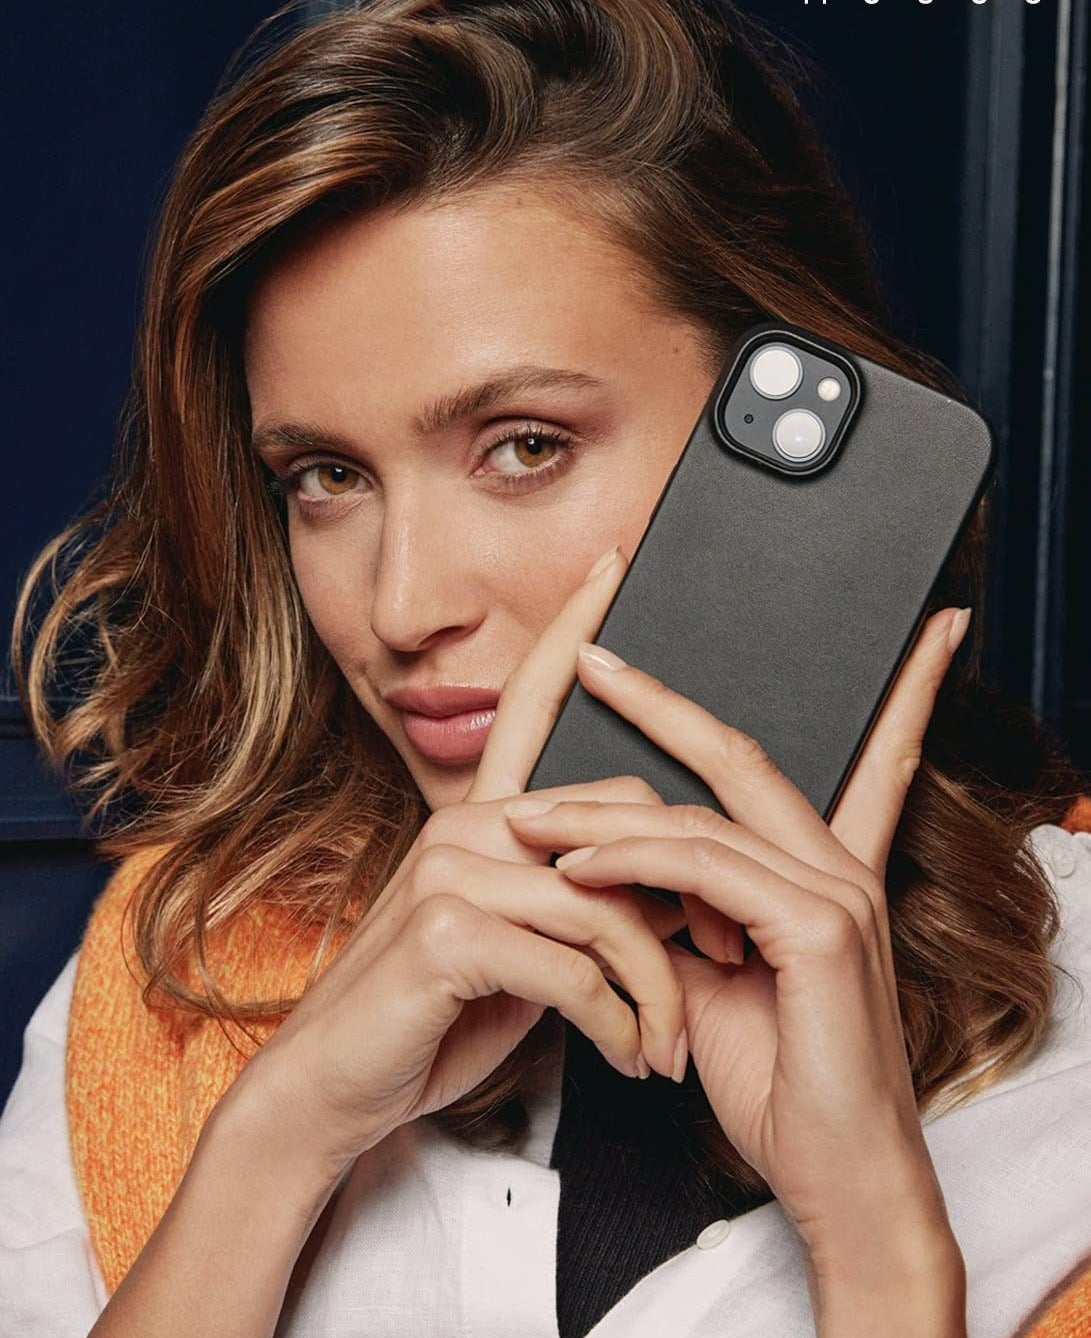 A person holding up a phone in the case